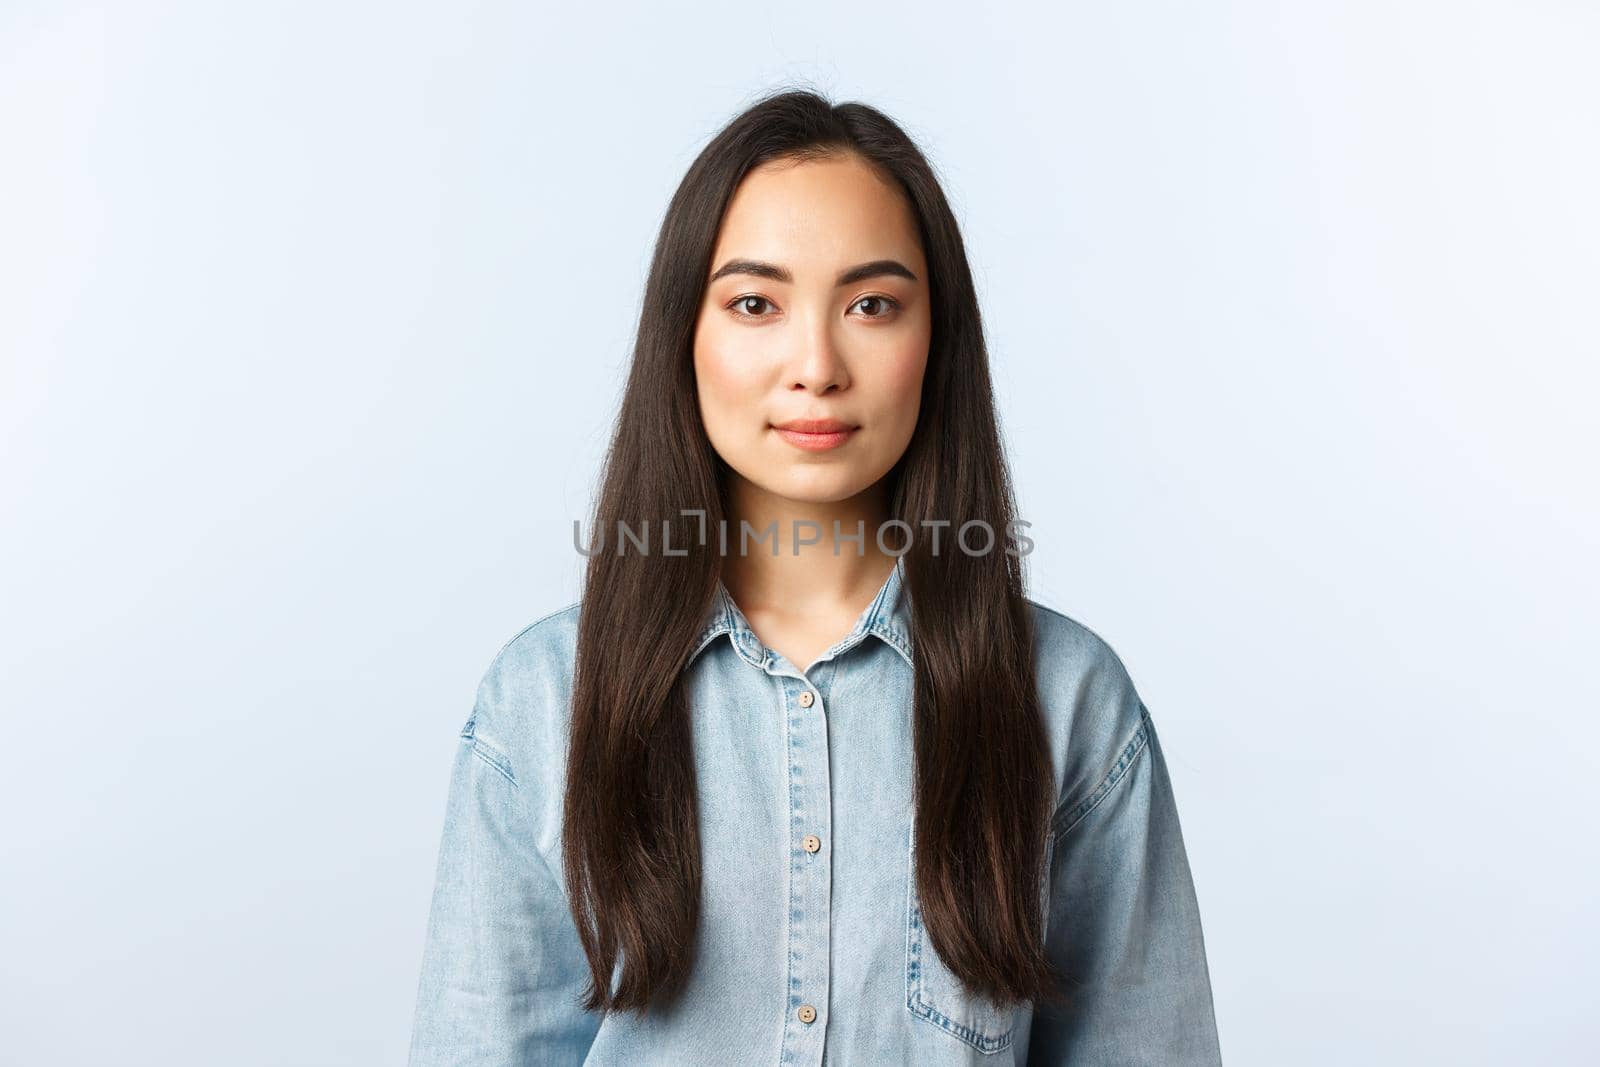 Lifestyle, people emotions and beauty concept. Young woman with long dark hair looking camera with smile. Confident female student starting part-time job feeling determined by Benzoix